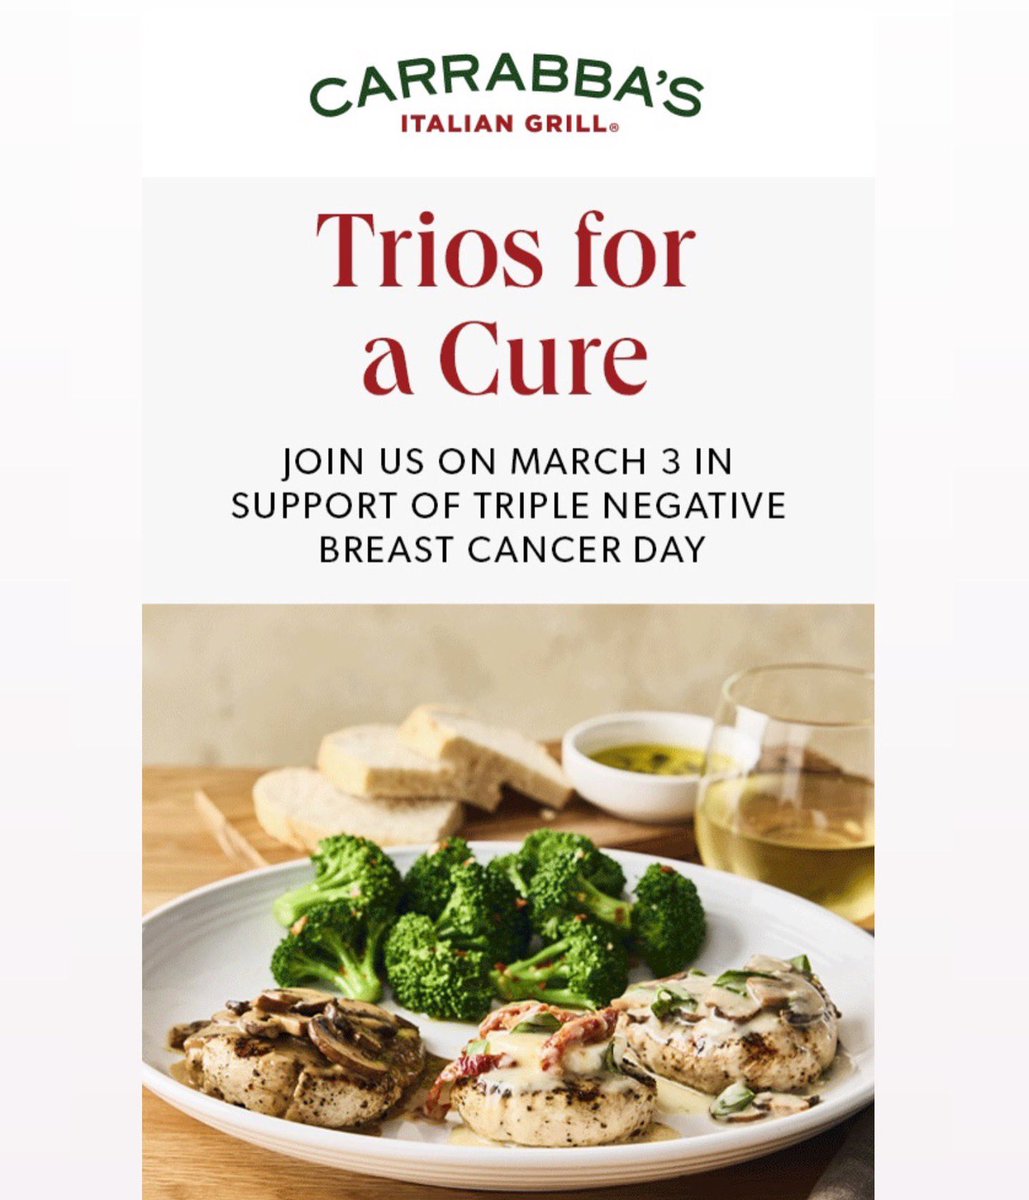 It is #TNBCDay! Dine with a purpose @Carrabbas for #TriosForACure! For every Trio ordered TODAY, @Carrabbas will donate $3 to #TNBC Foundation & match each donation, totaling $6 per order! Come hungry, leave fulfilled on #TripleNegativeBreastCancer Day